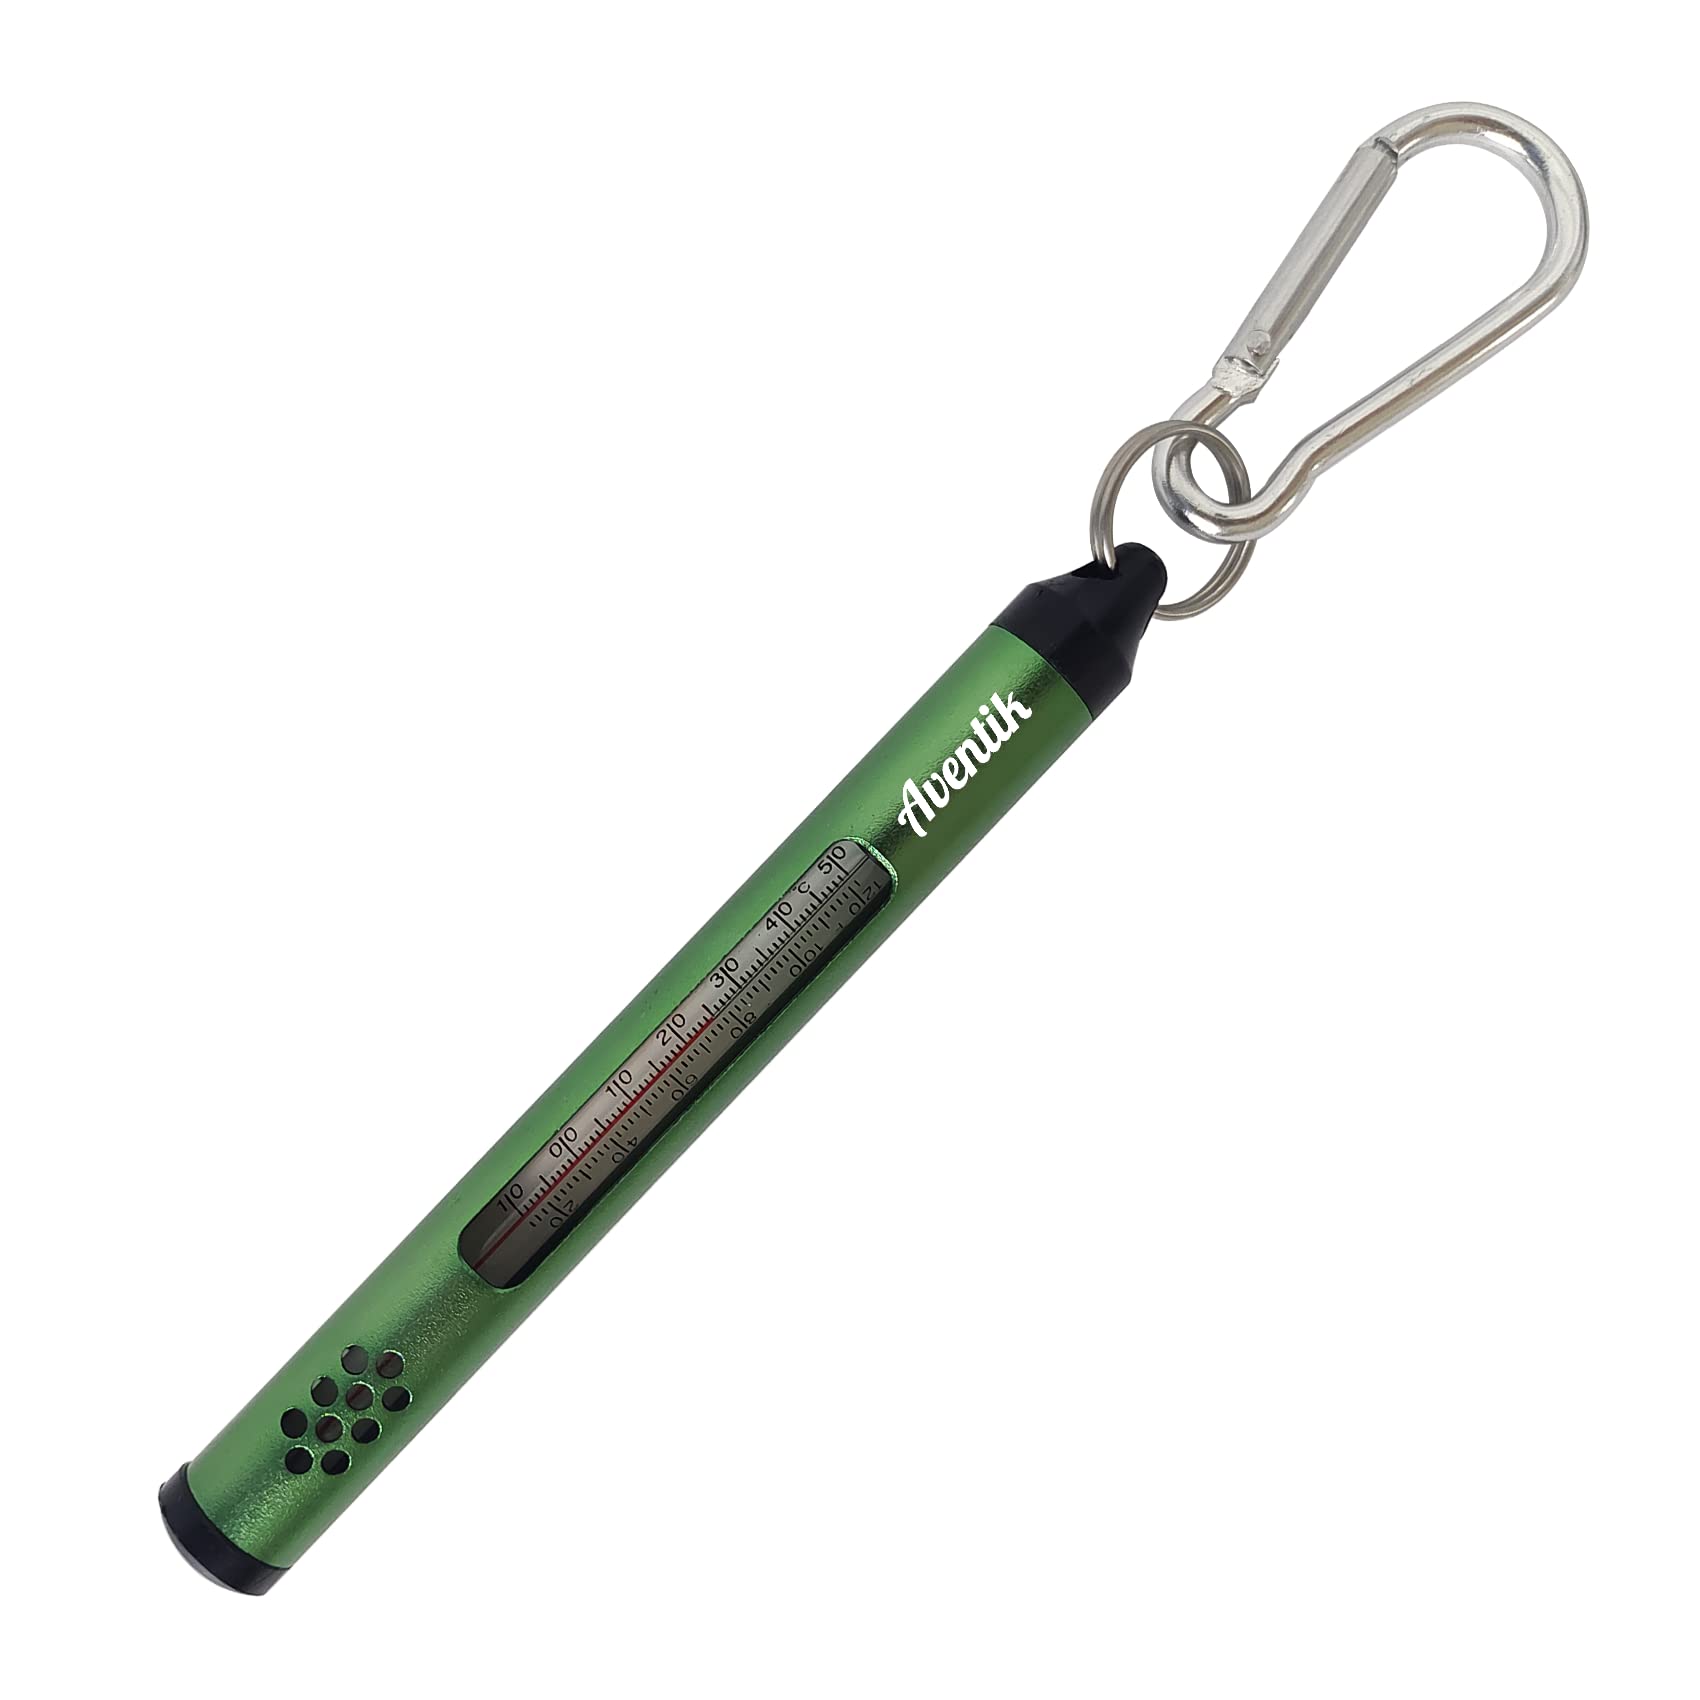 Aventik Fly Fishing Water Stream Thermometer Fishing Accessories(Green)